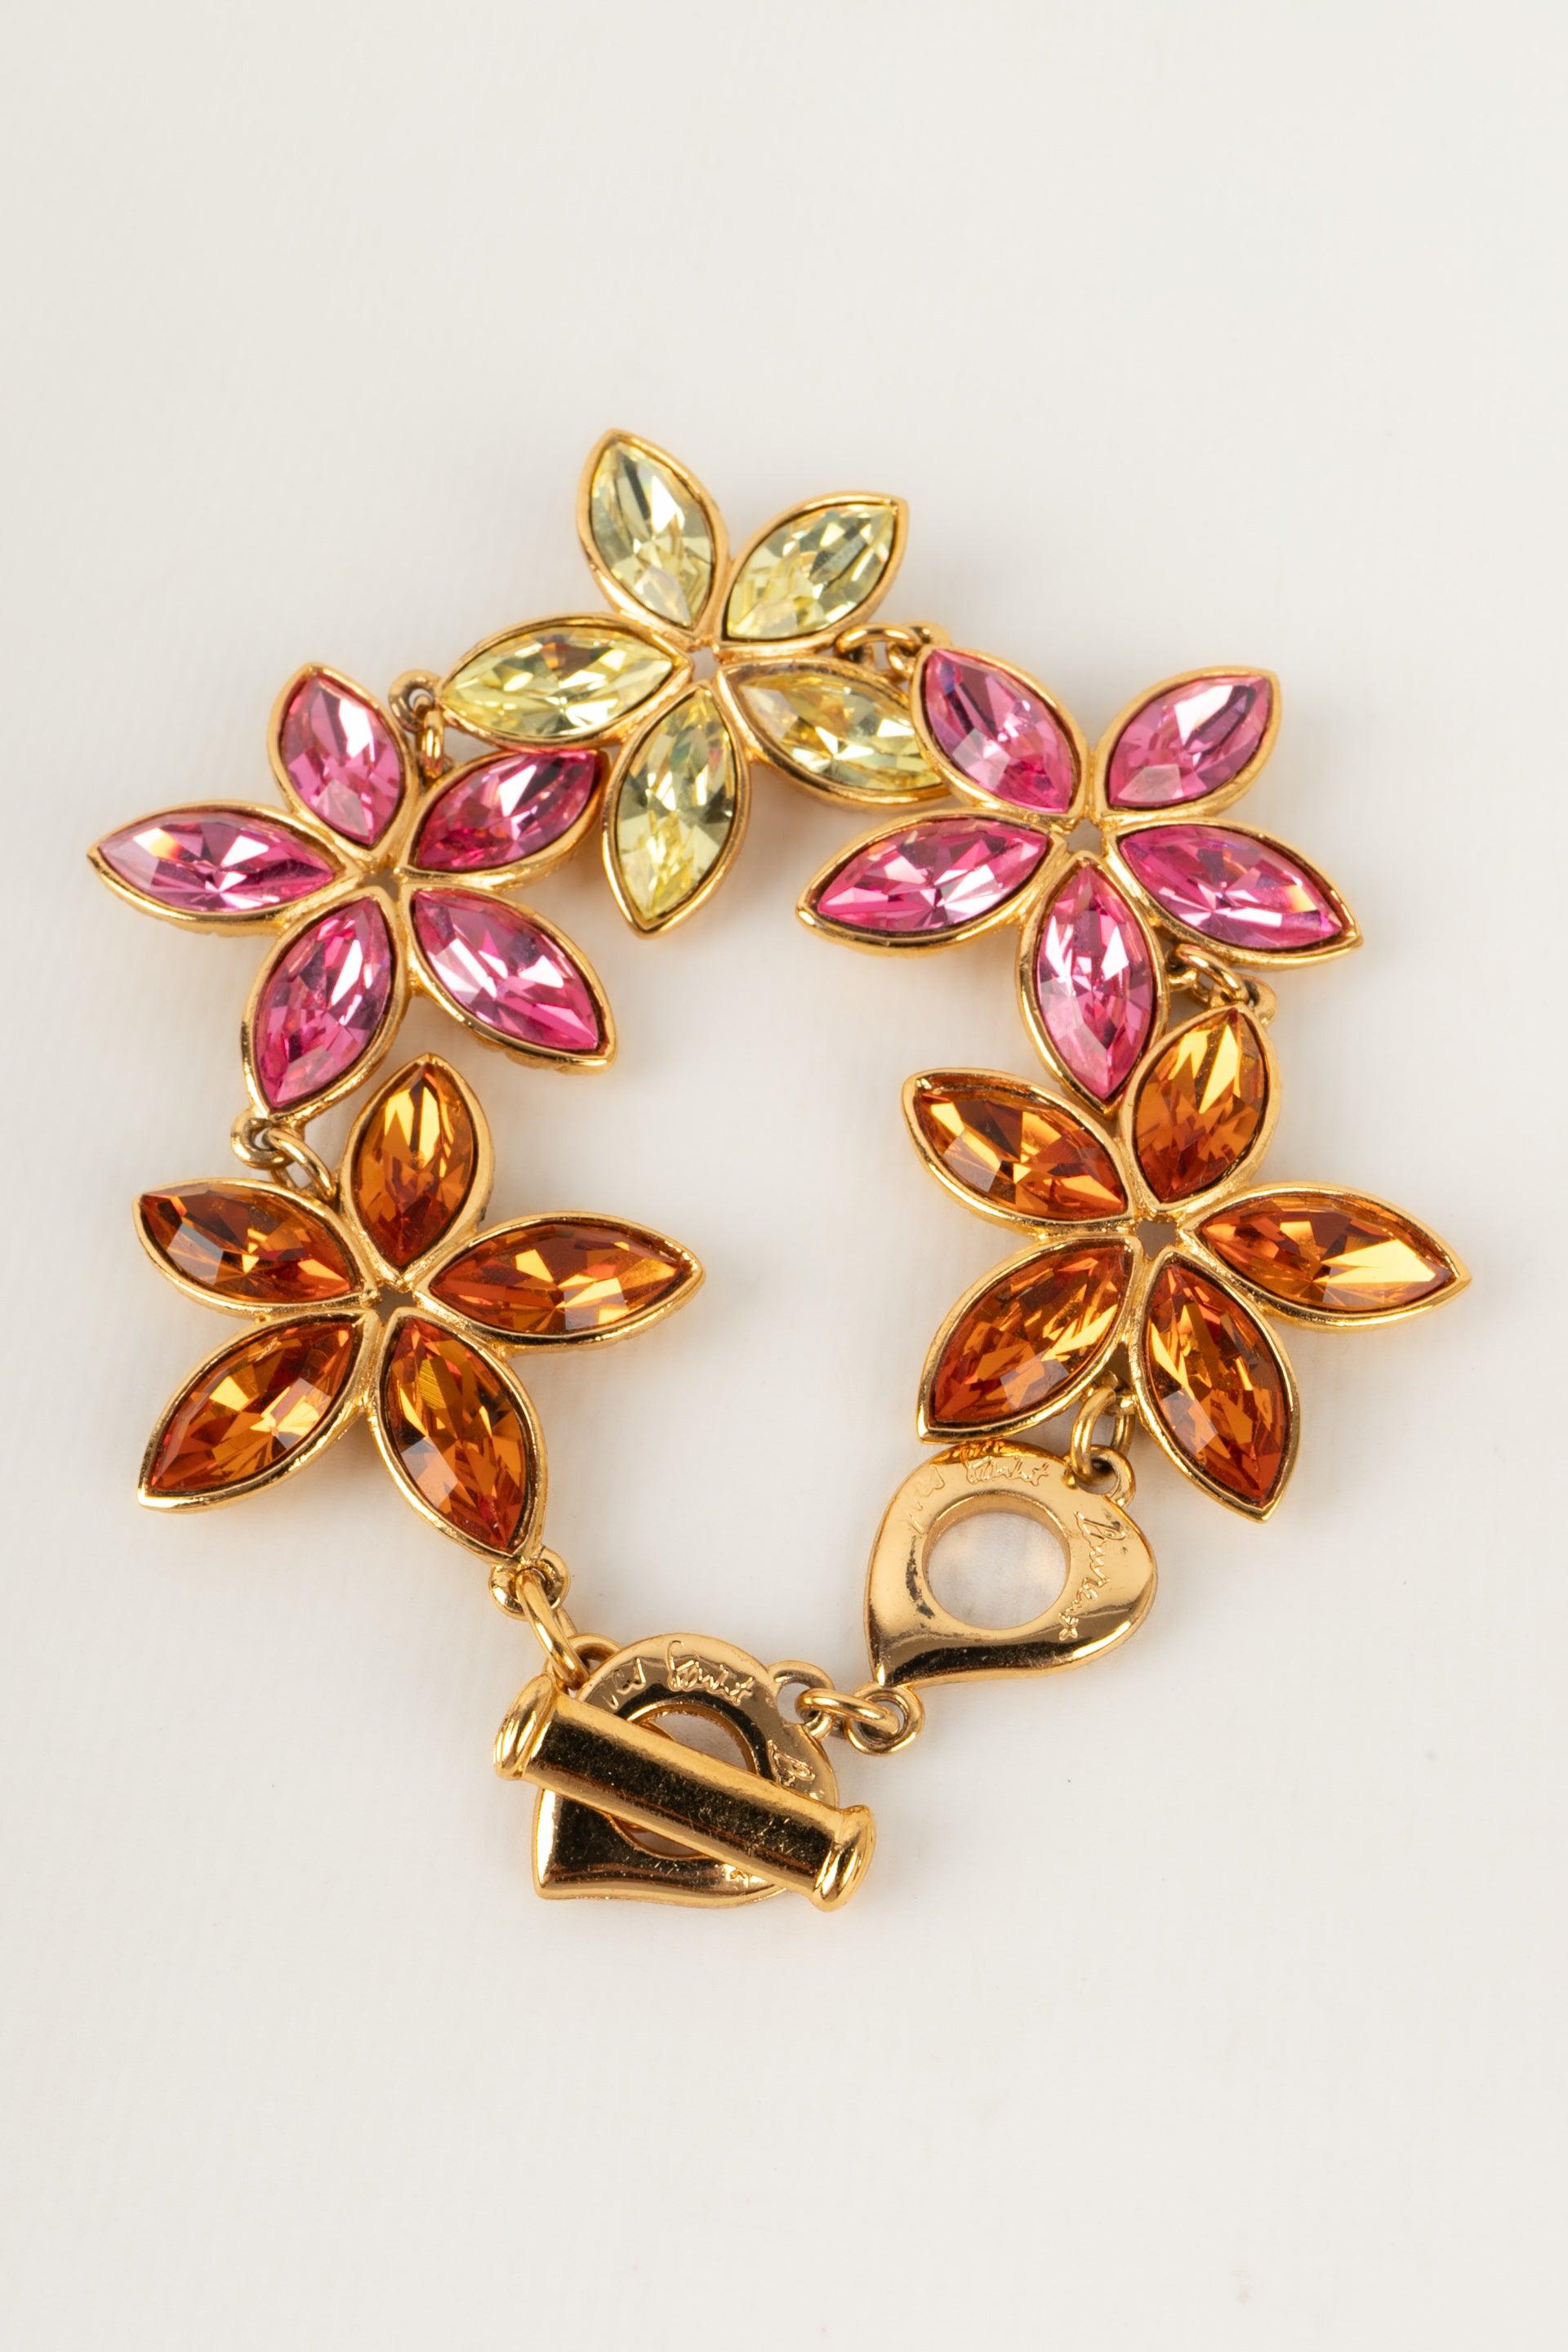 Yves Saint Laurent Golden Metal Jewelry Set with Colored Rhinestones For Sale 2